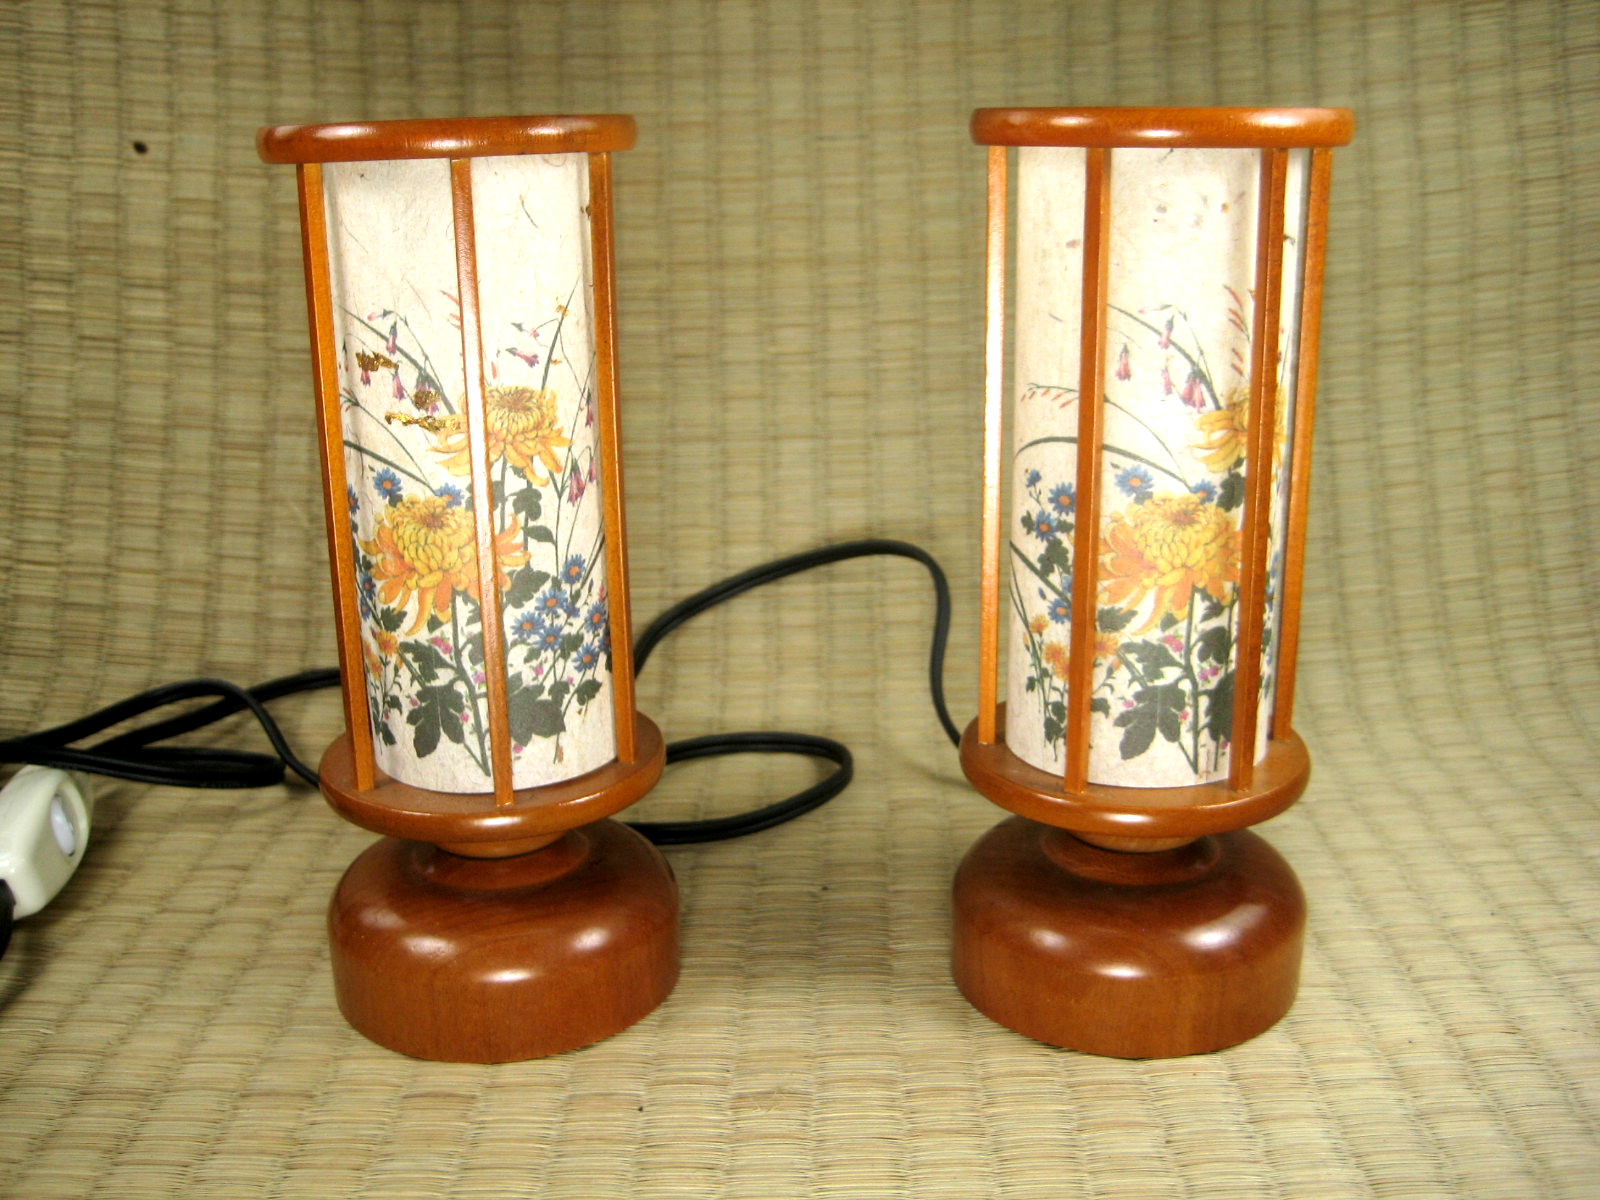 Set OfSmall Electric Japanese Wood & Paper Lanterns For Use In